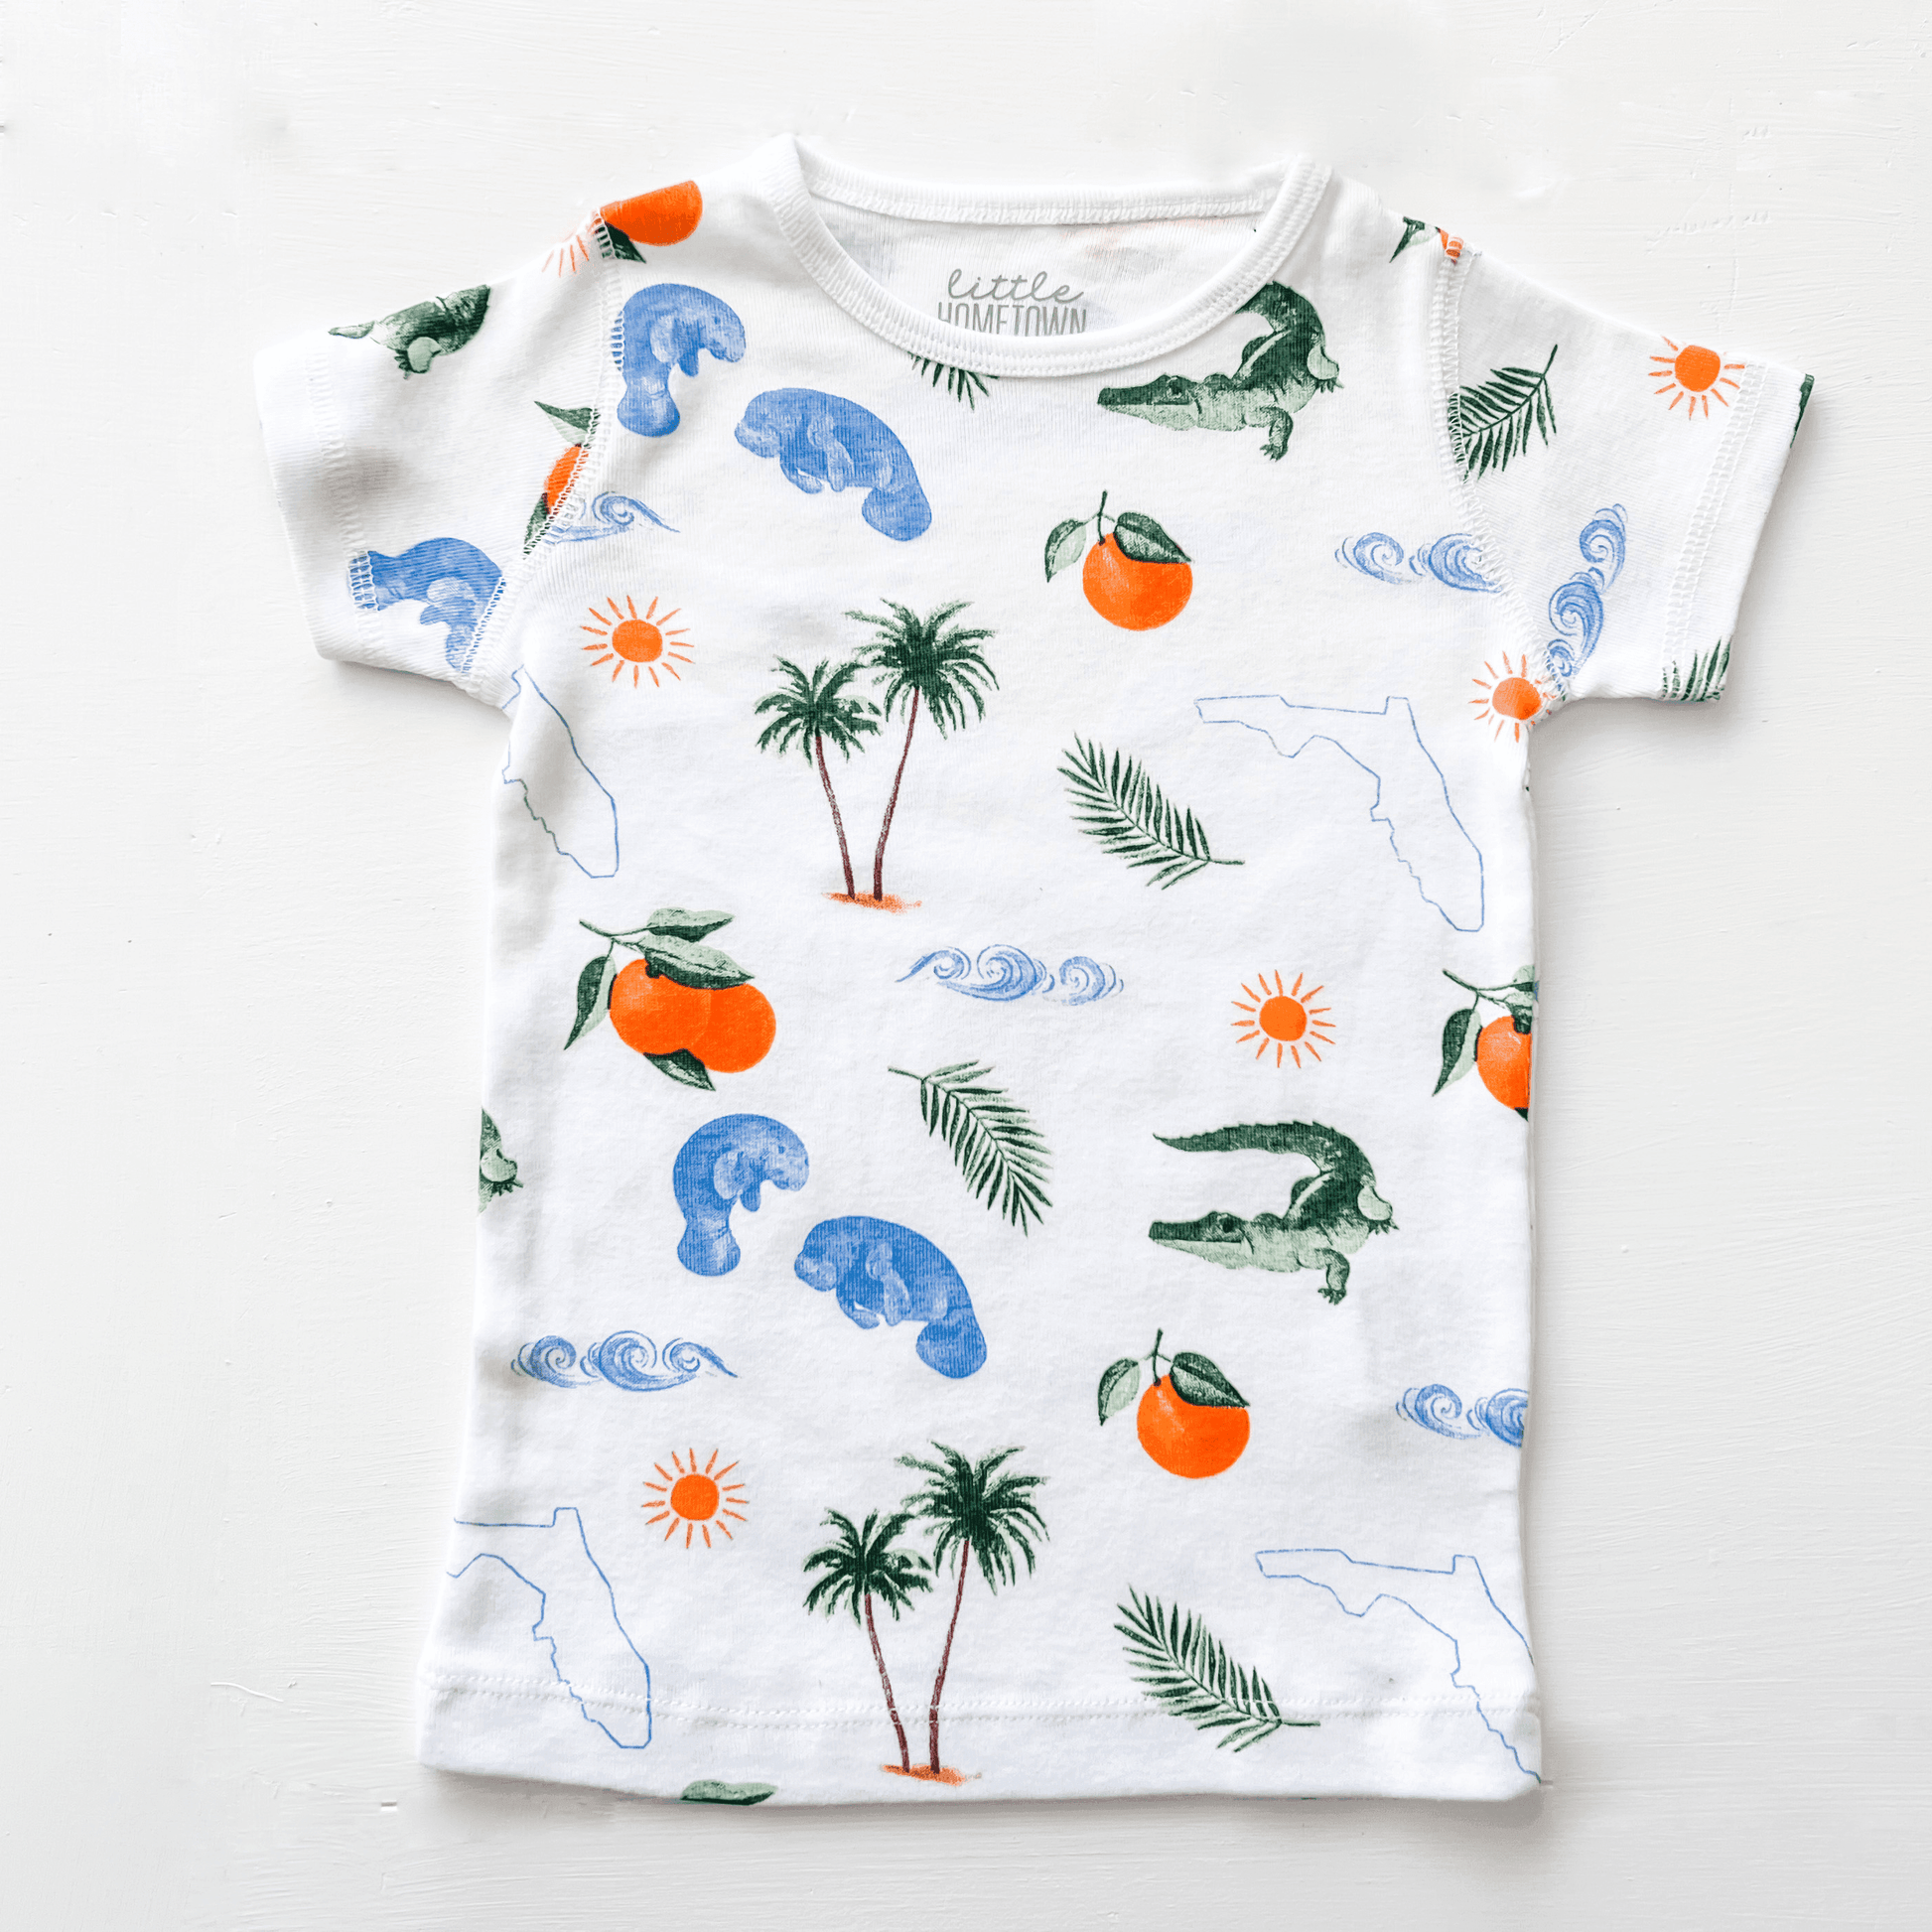 Toddler pajamas with Florida-themed illustrations, including palm trees, oranges, and alligators, on a white background.